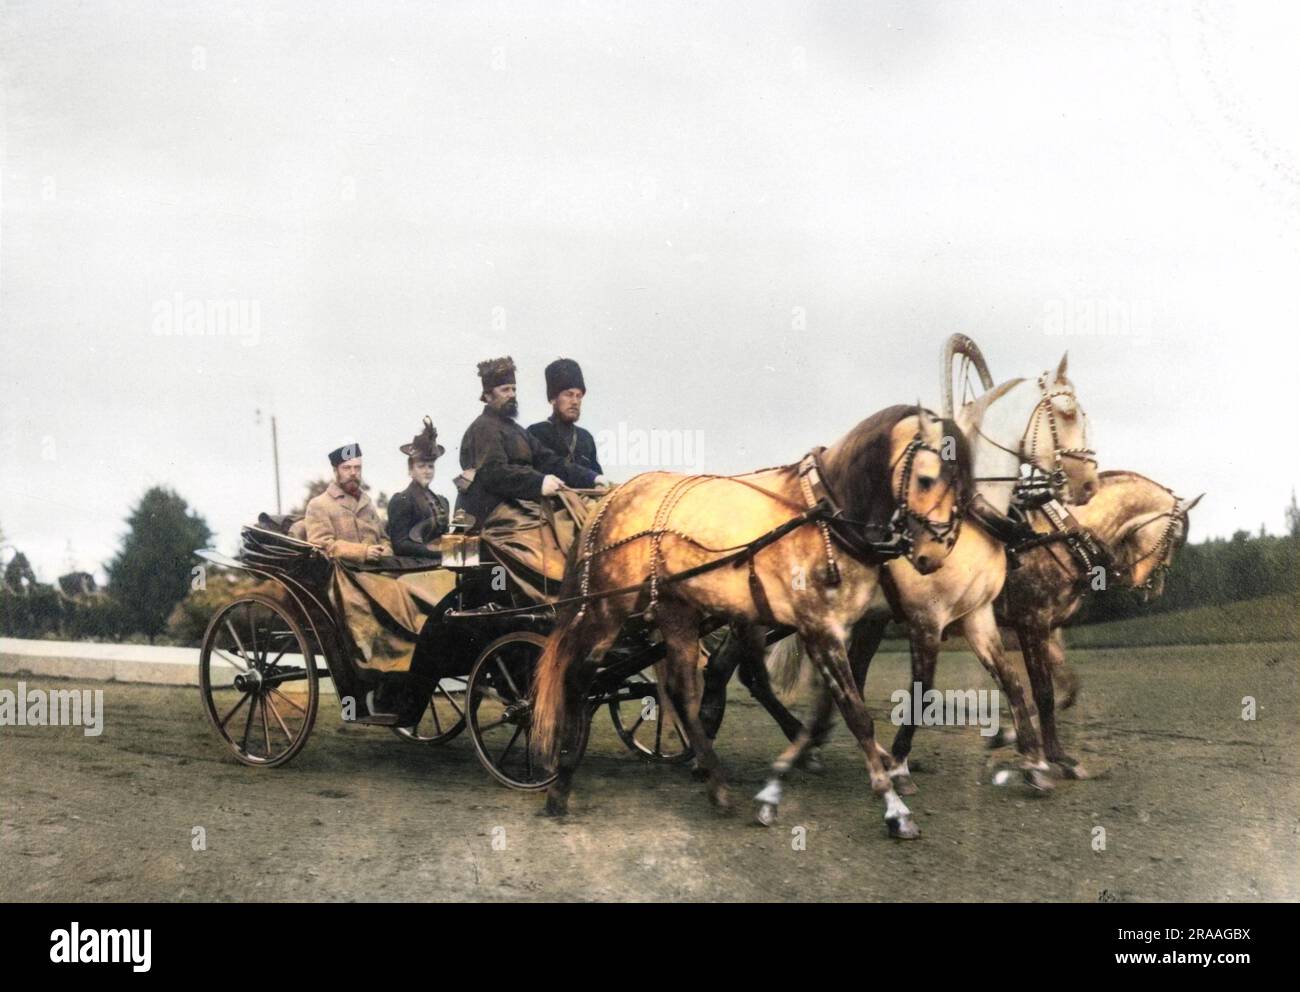 Tsar Nicholas II of Russia and his wife Alexandra Feodorovna in a  horse-drawn troika carriage. Troika is the Russian word for 'triplet' or 'trio' this being reference to the fact that troikas have three harnesses as they are pulled by three horses.     Date: circa 1900 Stock Photo